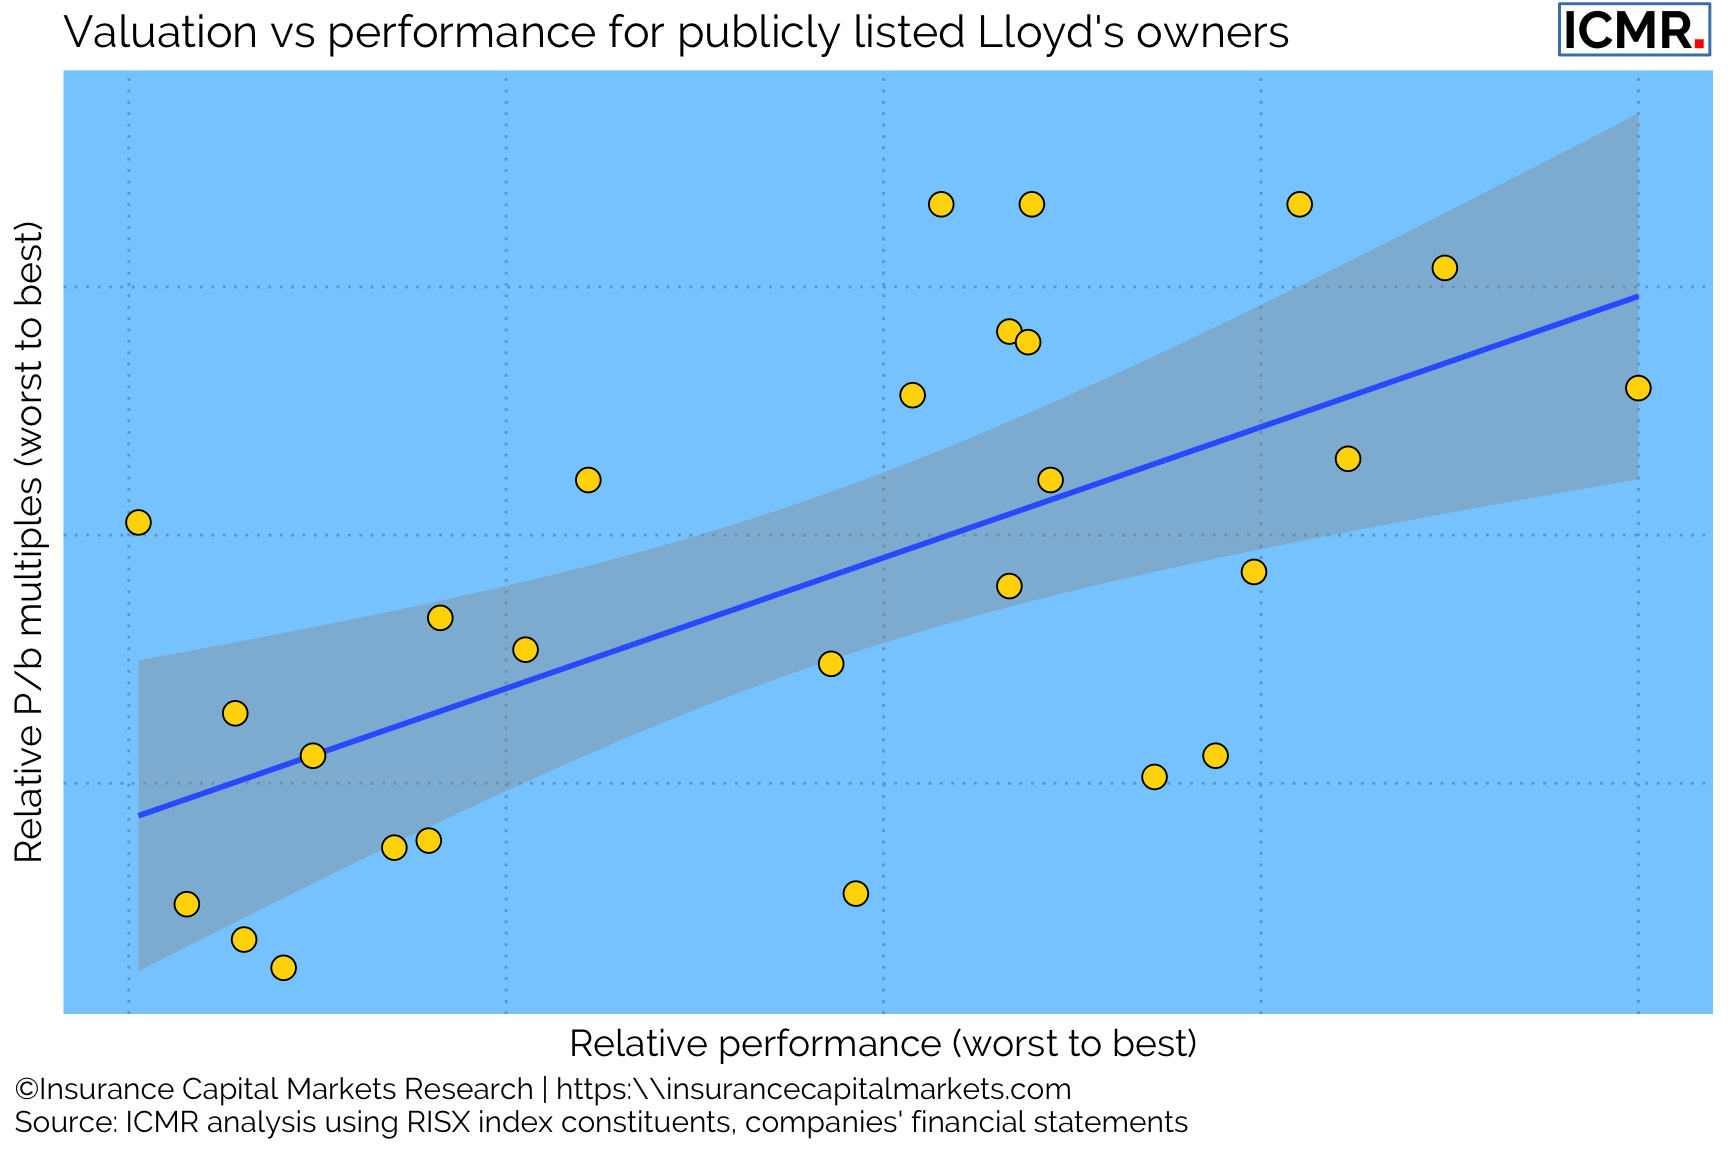 Price to book multiples distribution of publicly listed global specialty (re)insurance companies with Lloyd's subsidiaries ranked against their ranked average performance 2019 - 2021.